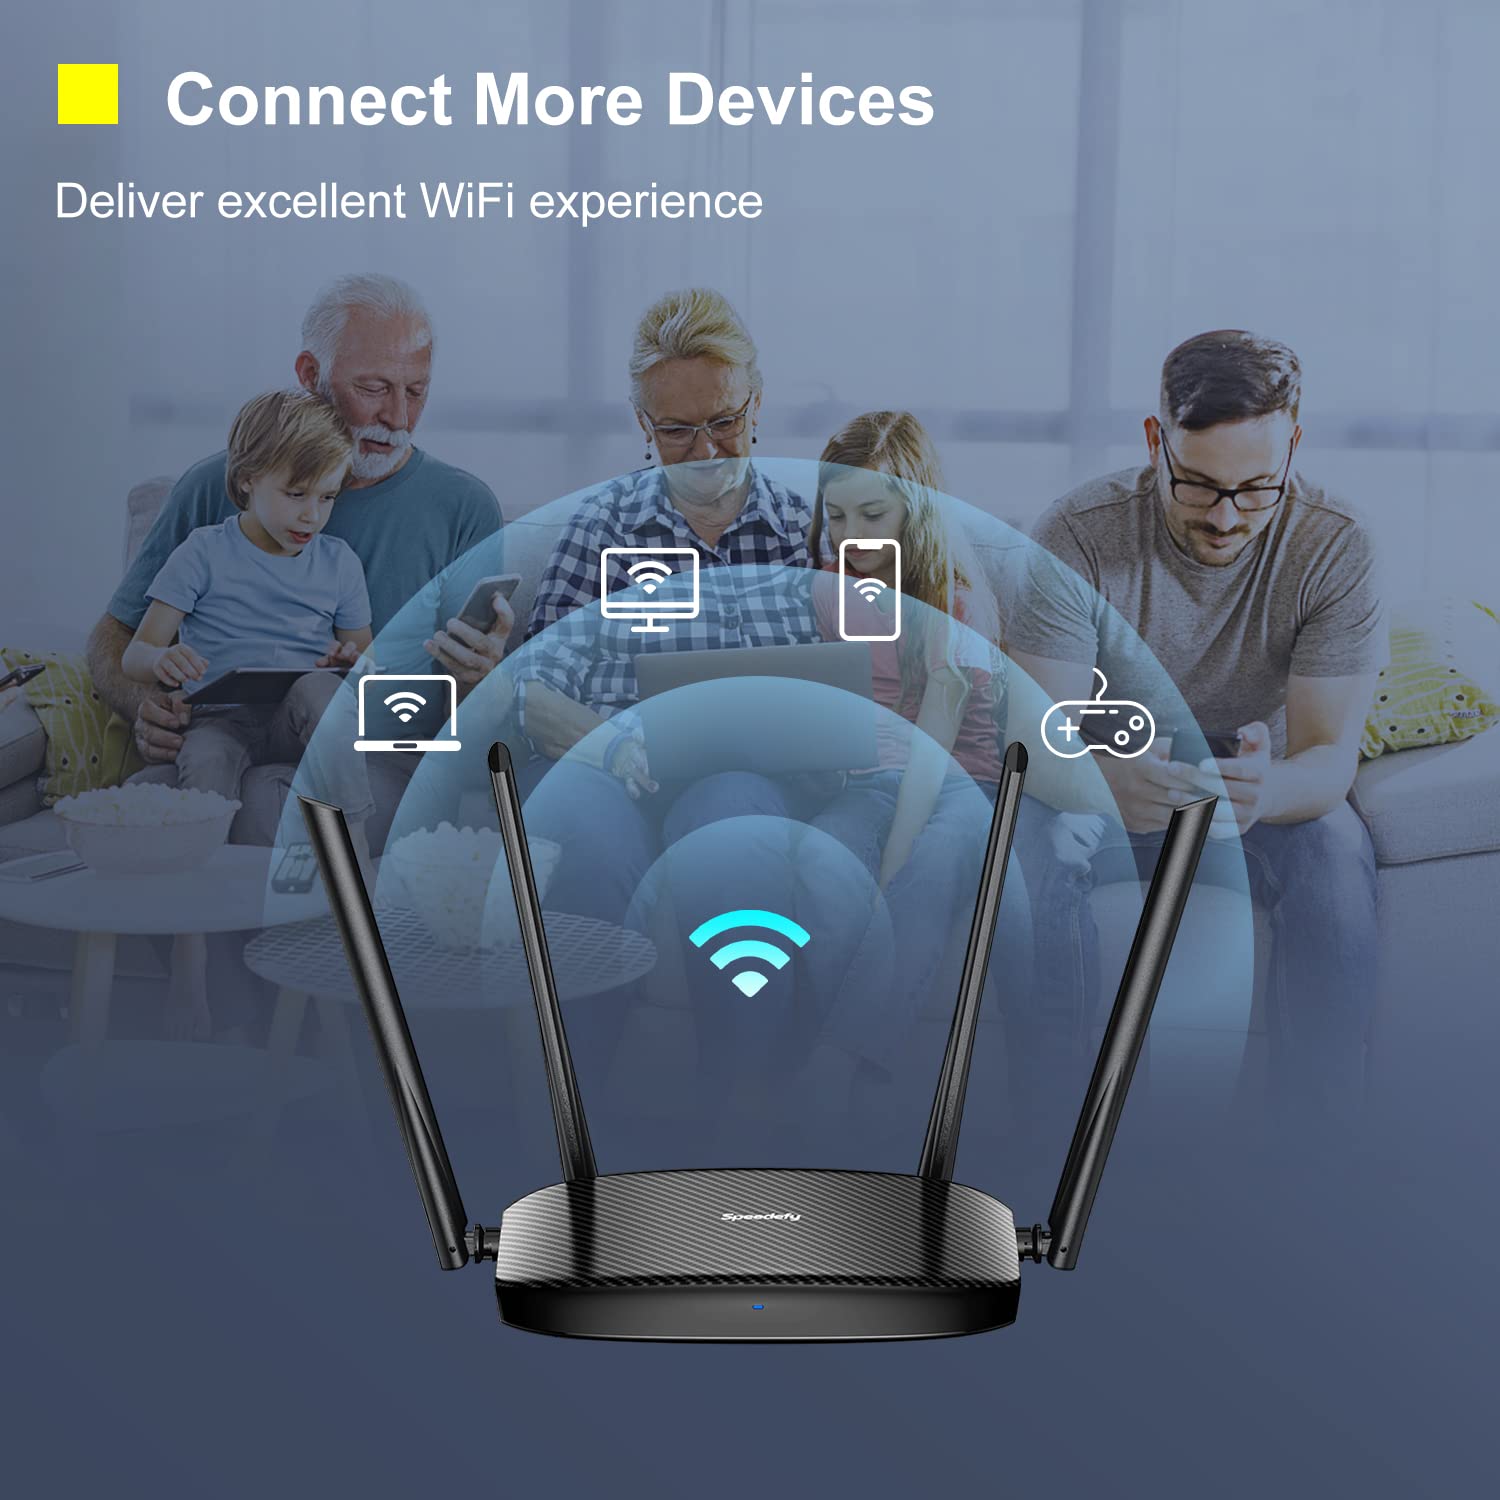 Speedefy WiFi Router for Home, AC1200 Gigabit Dual Band Computer Routers for Wireless Internet, Long Range Coverage, MU-MIMO, IPV6, Beamforming, AP Mode, Guest WiFi and Parental Control (Model K4)